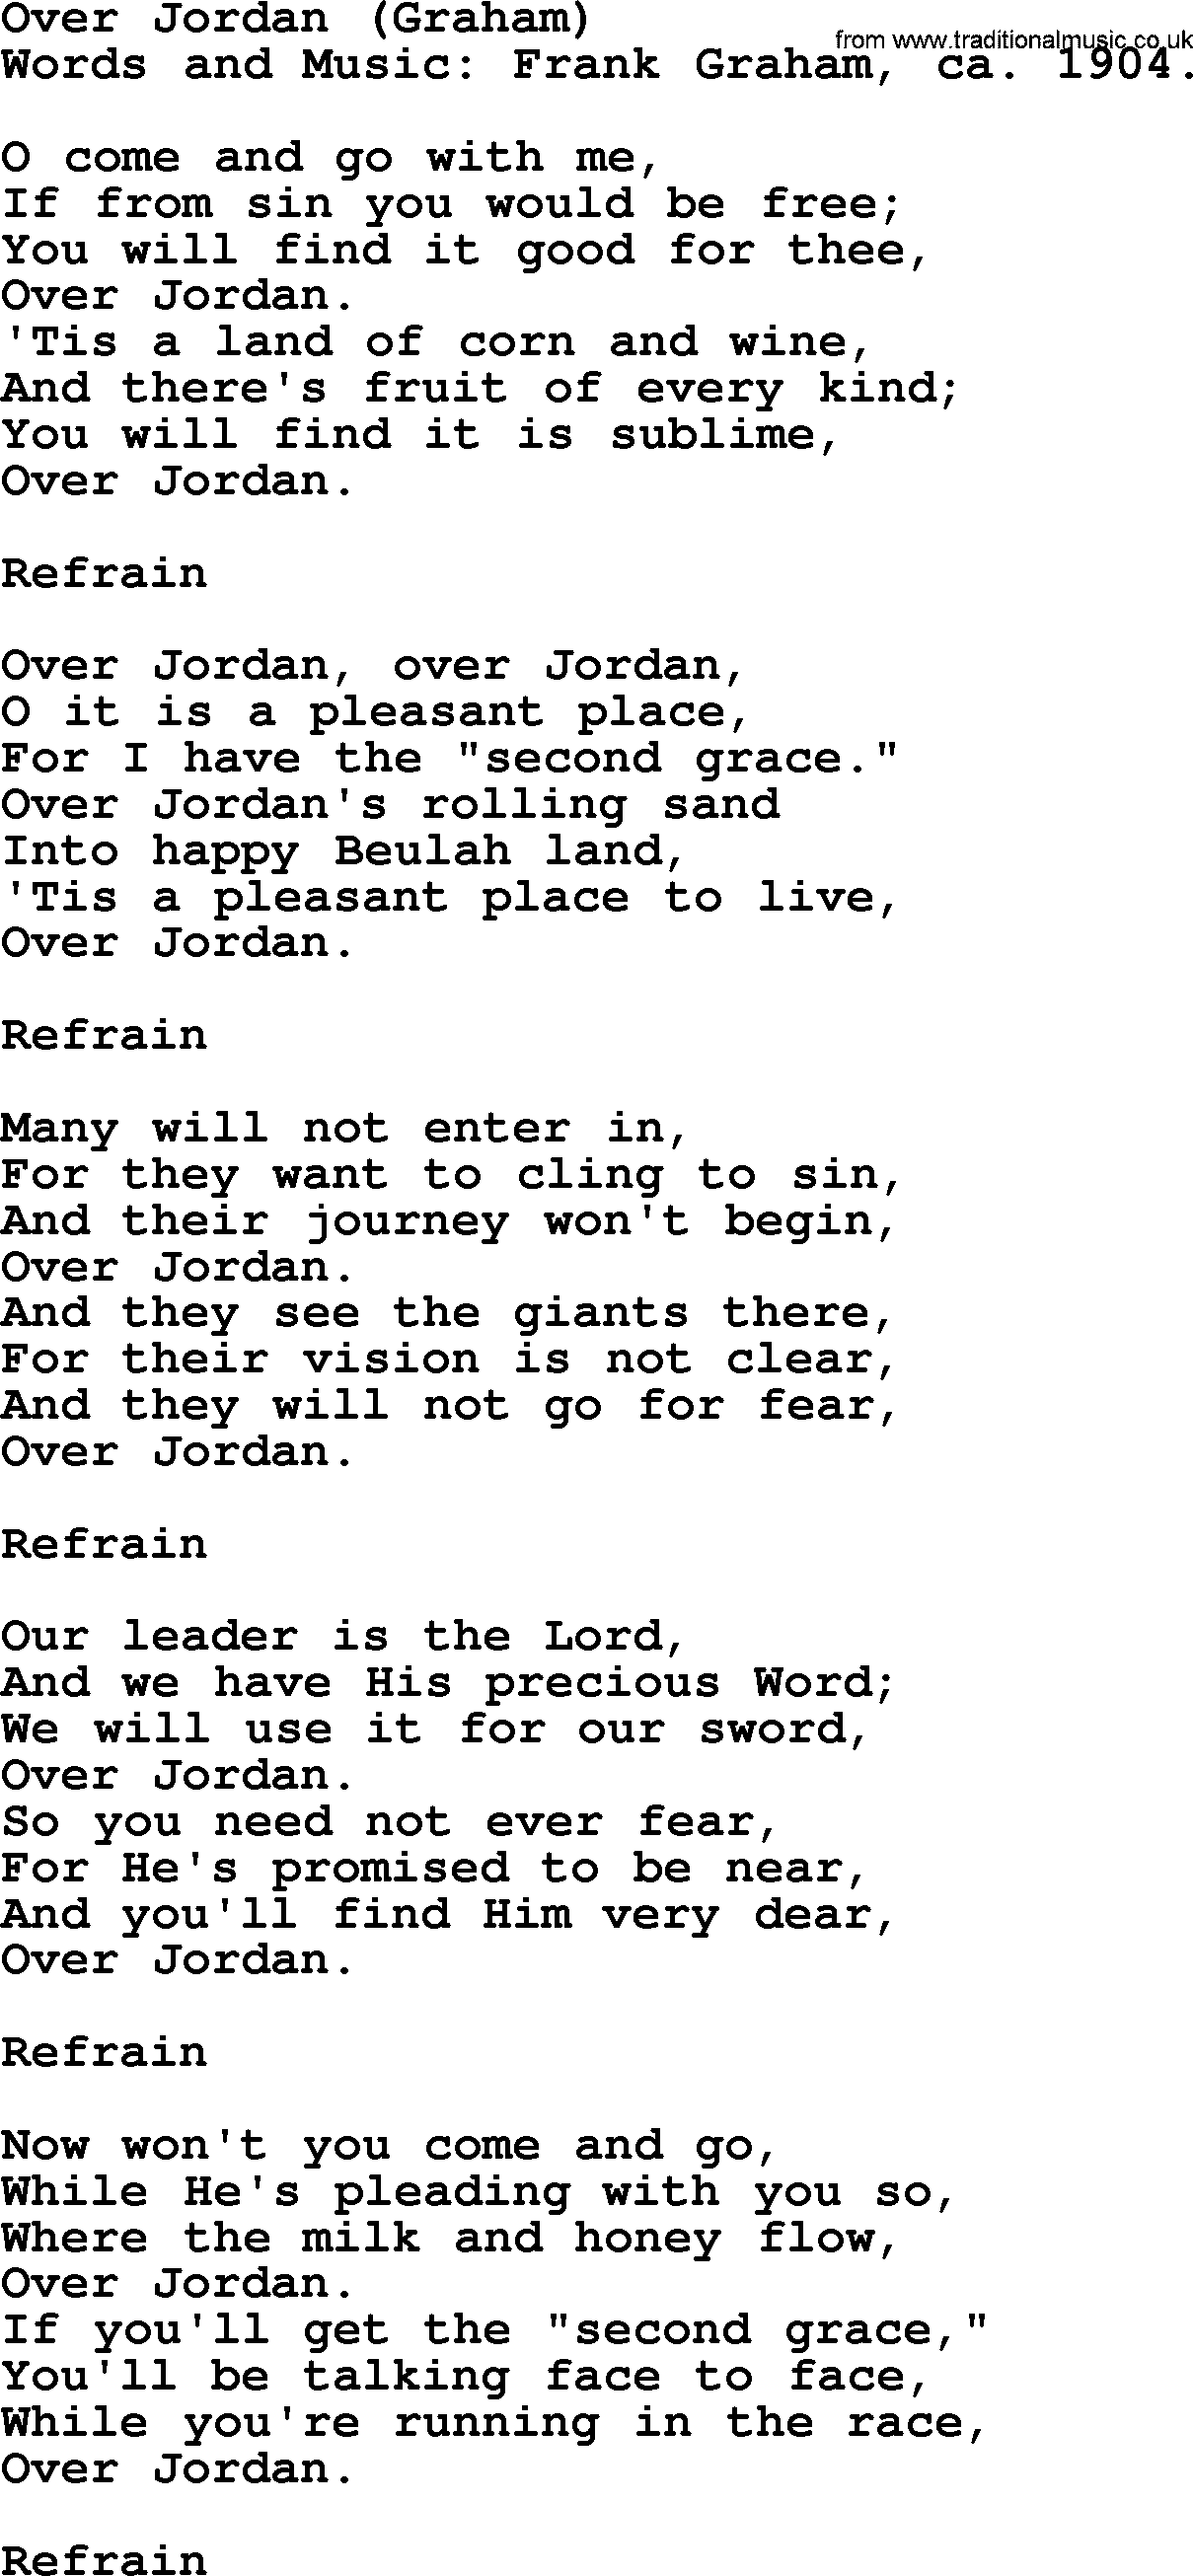 Songs and Hymns about Heaven: Over Jordan (graham) lyrics with PDF